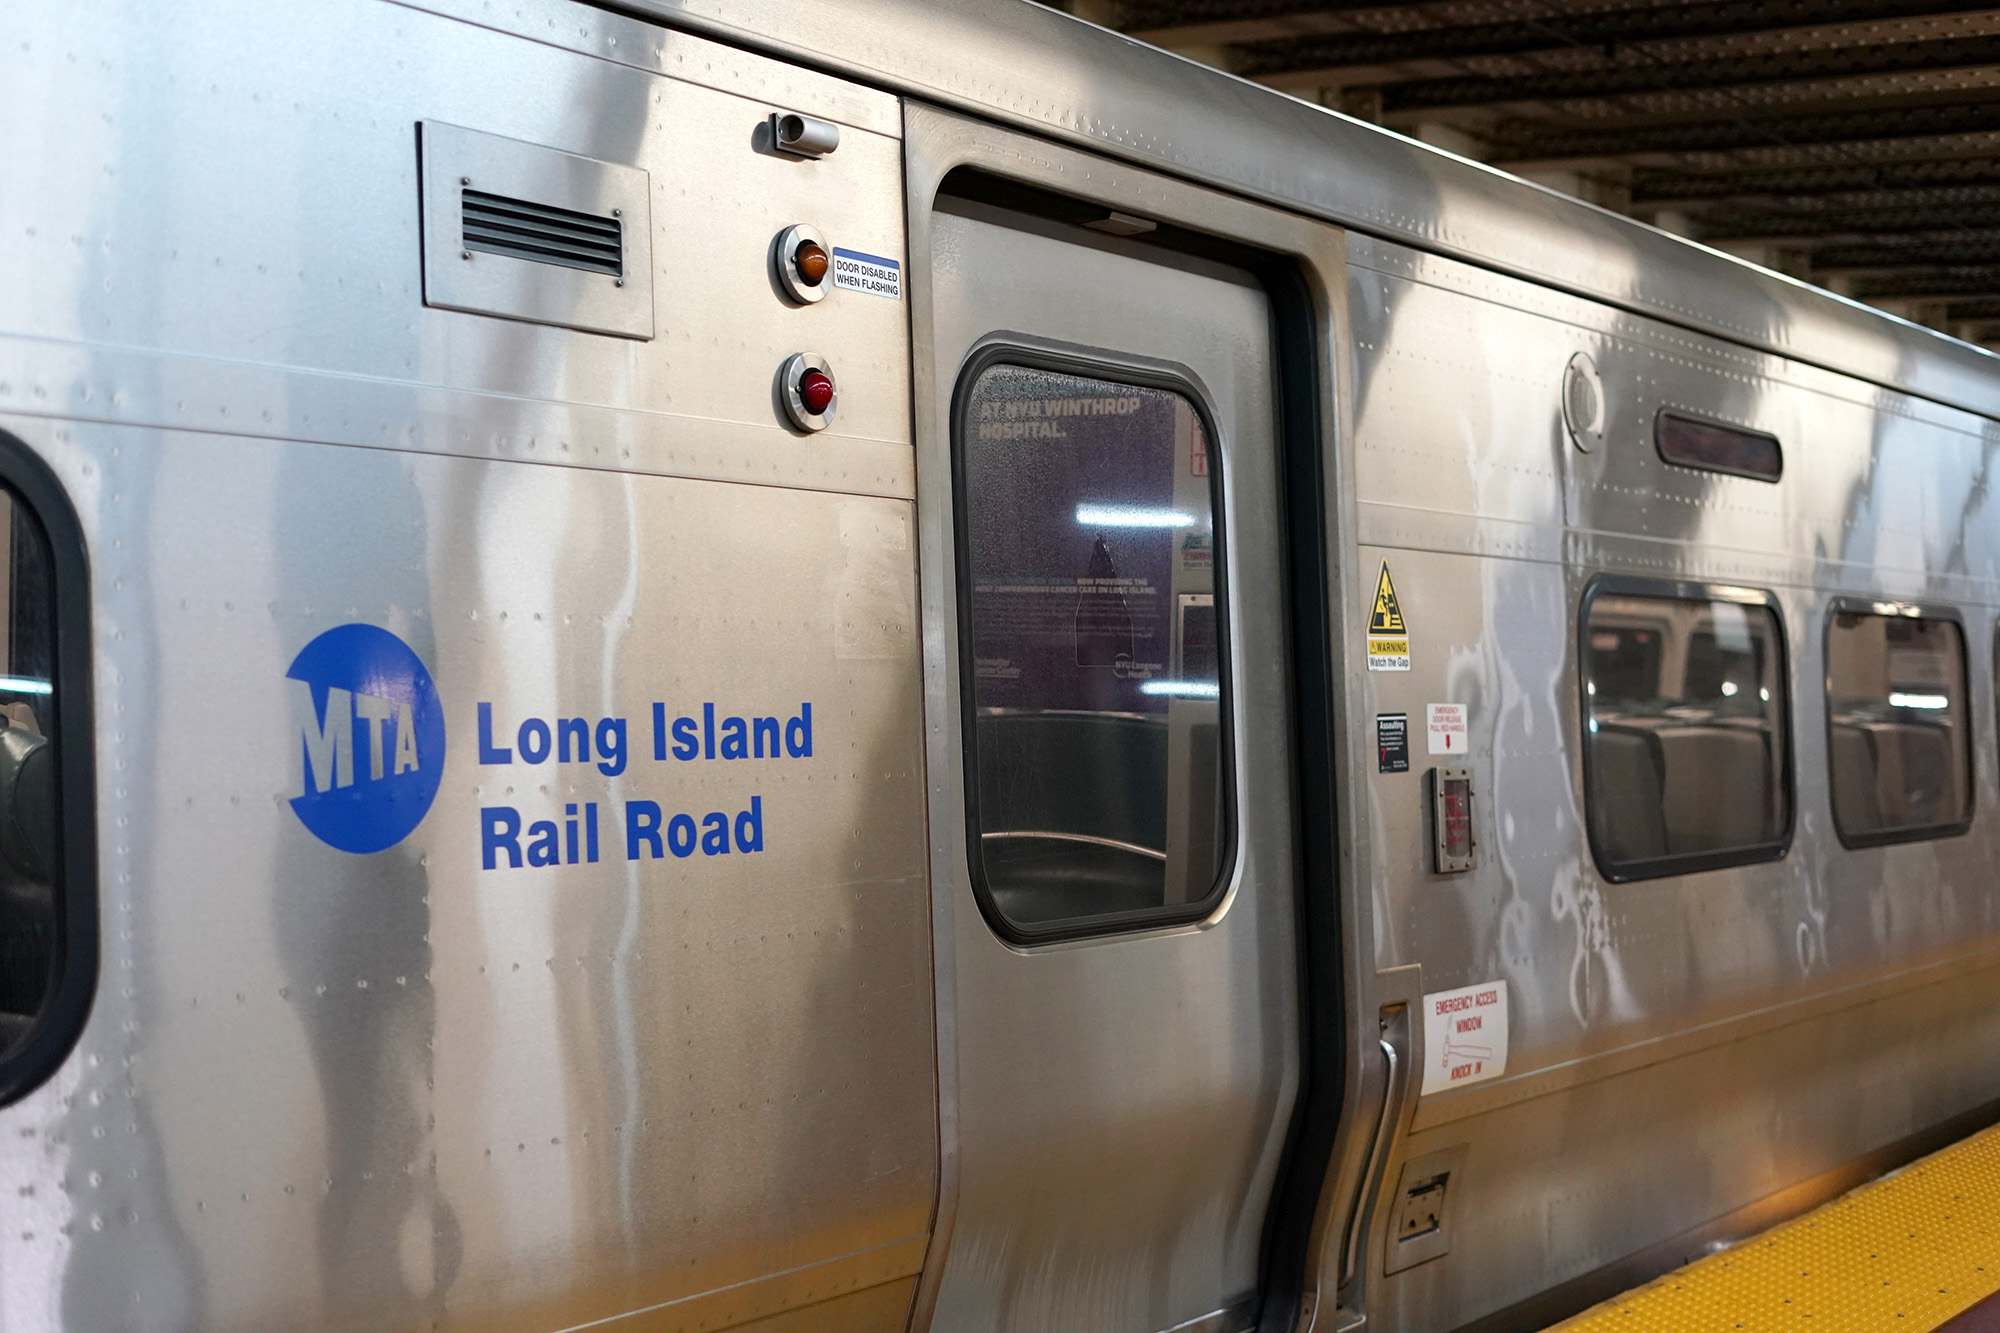 general view of a Long Island Railroad train or LIRR train as seen at Penn Station in New York, NY on August 6, 2020.